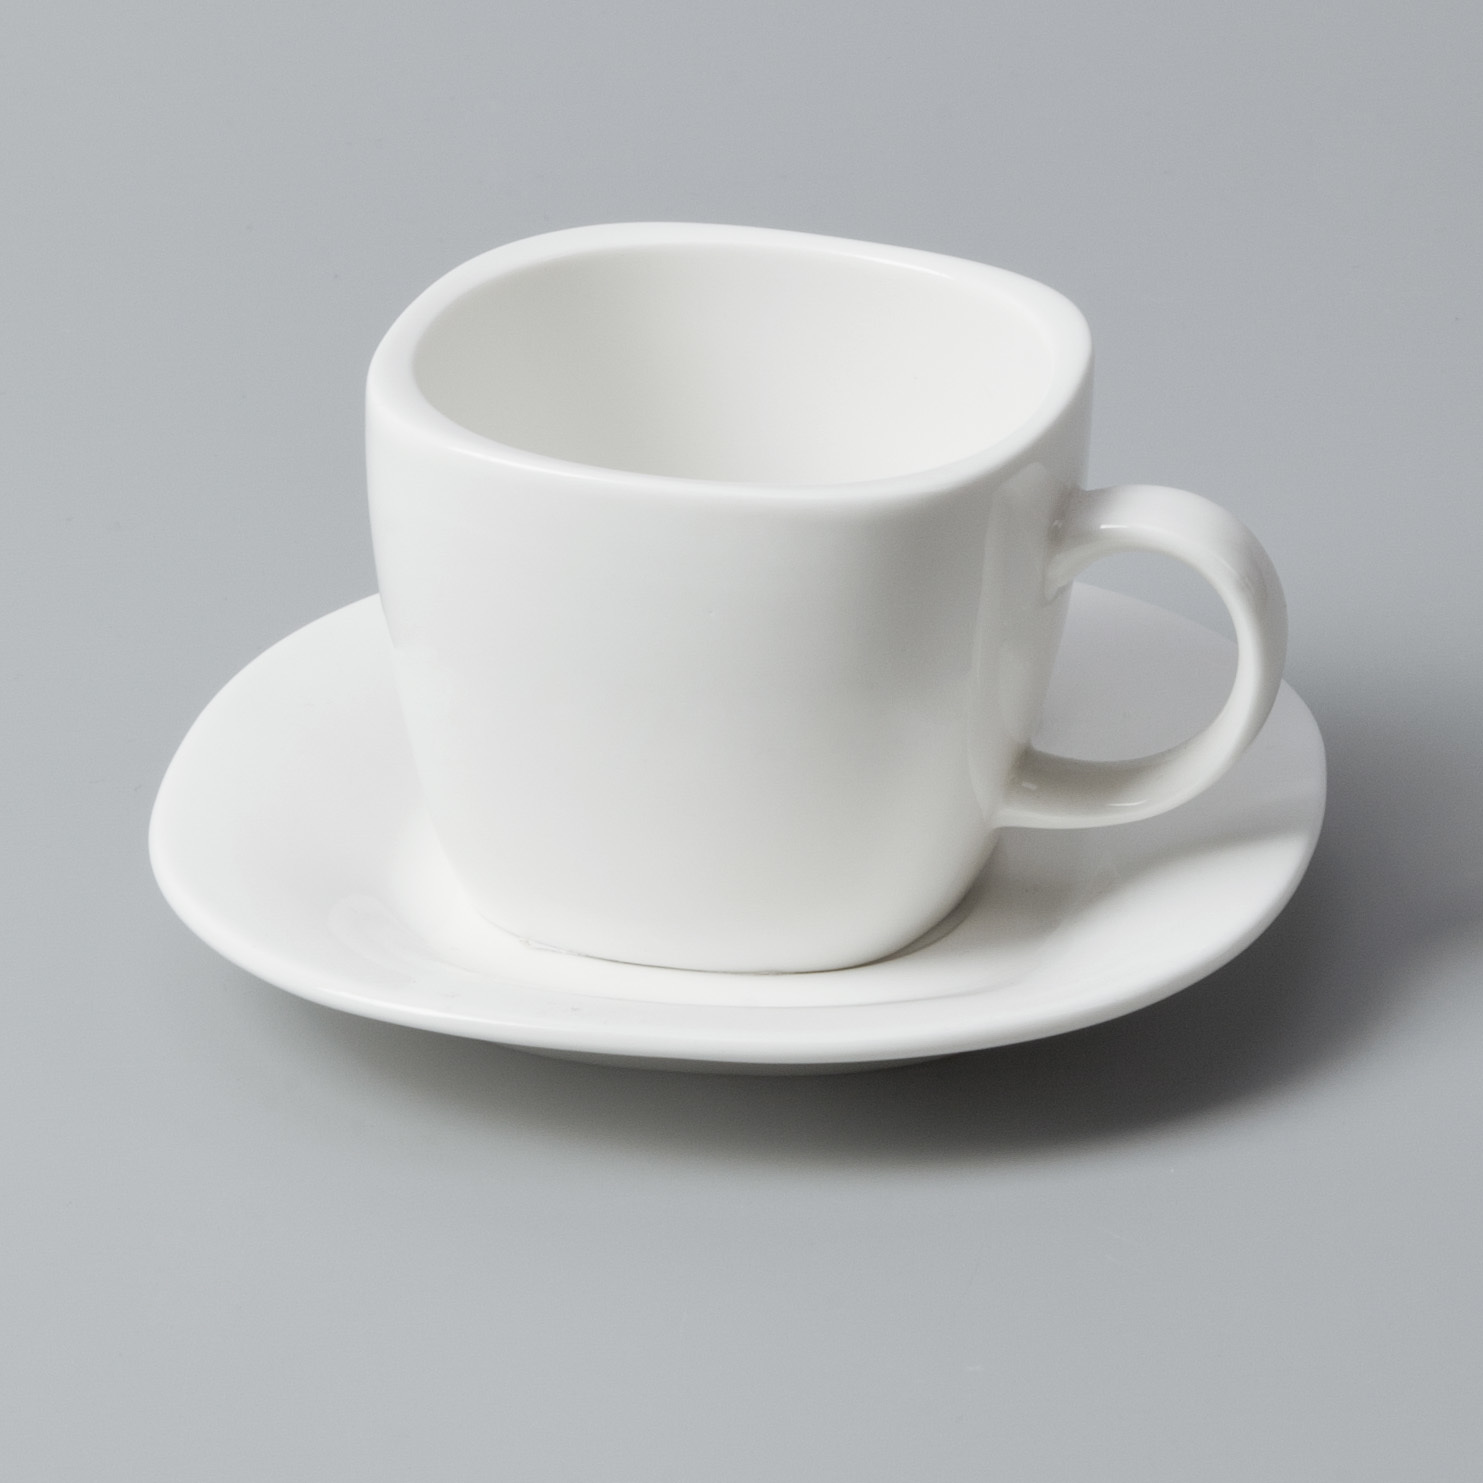 Two Eight Brand restaurant bistro french white porcelain tableware